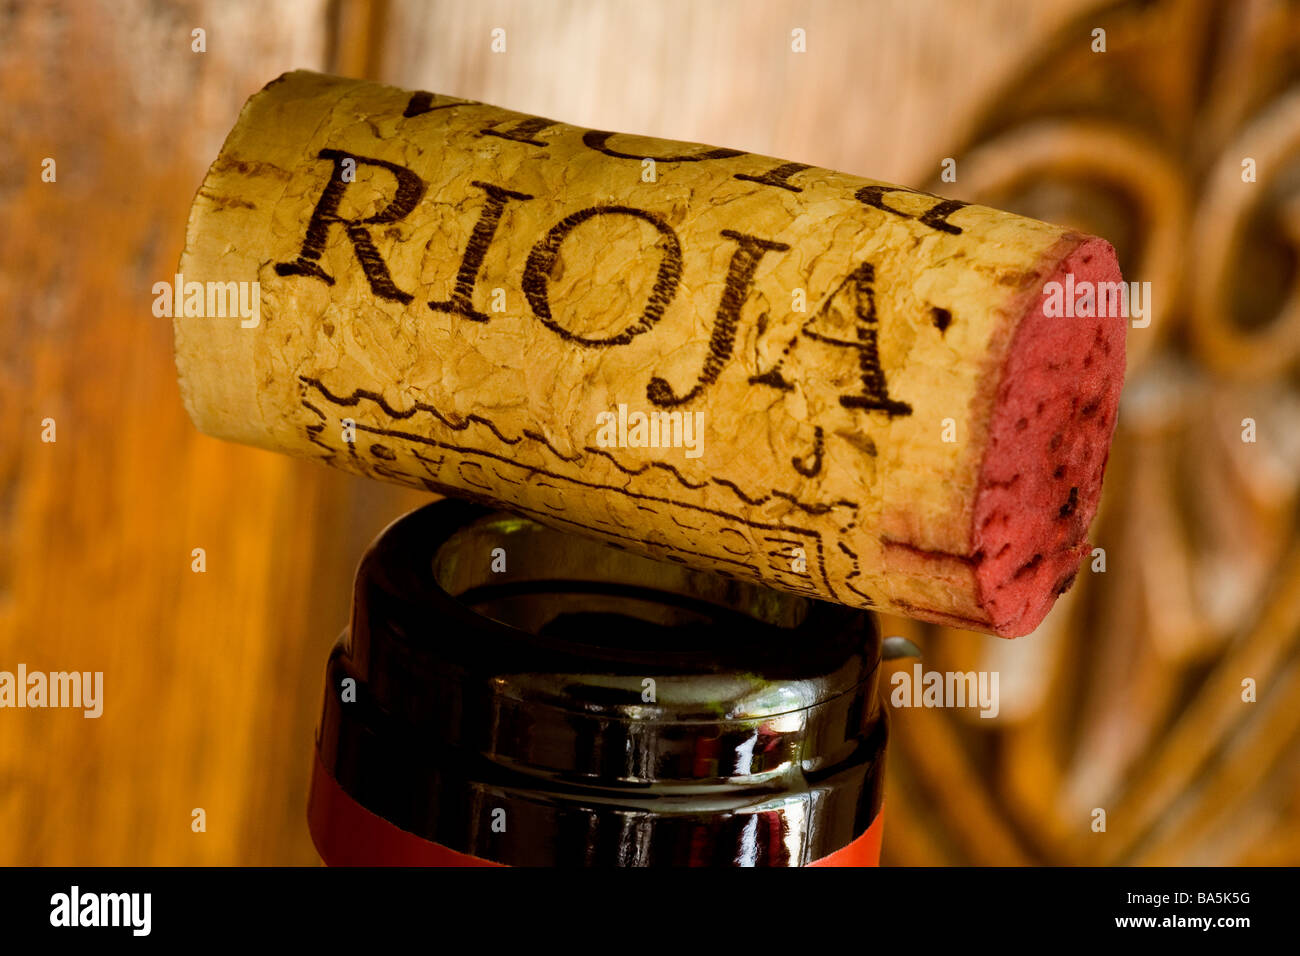 CORK FROM A BOTTLE OF RIOJA RED WINE Stock Photo